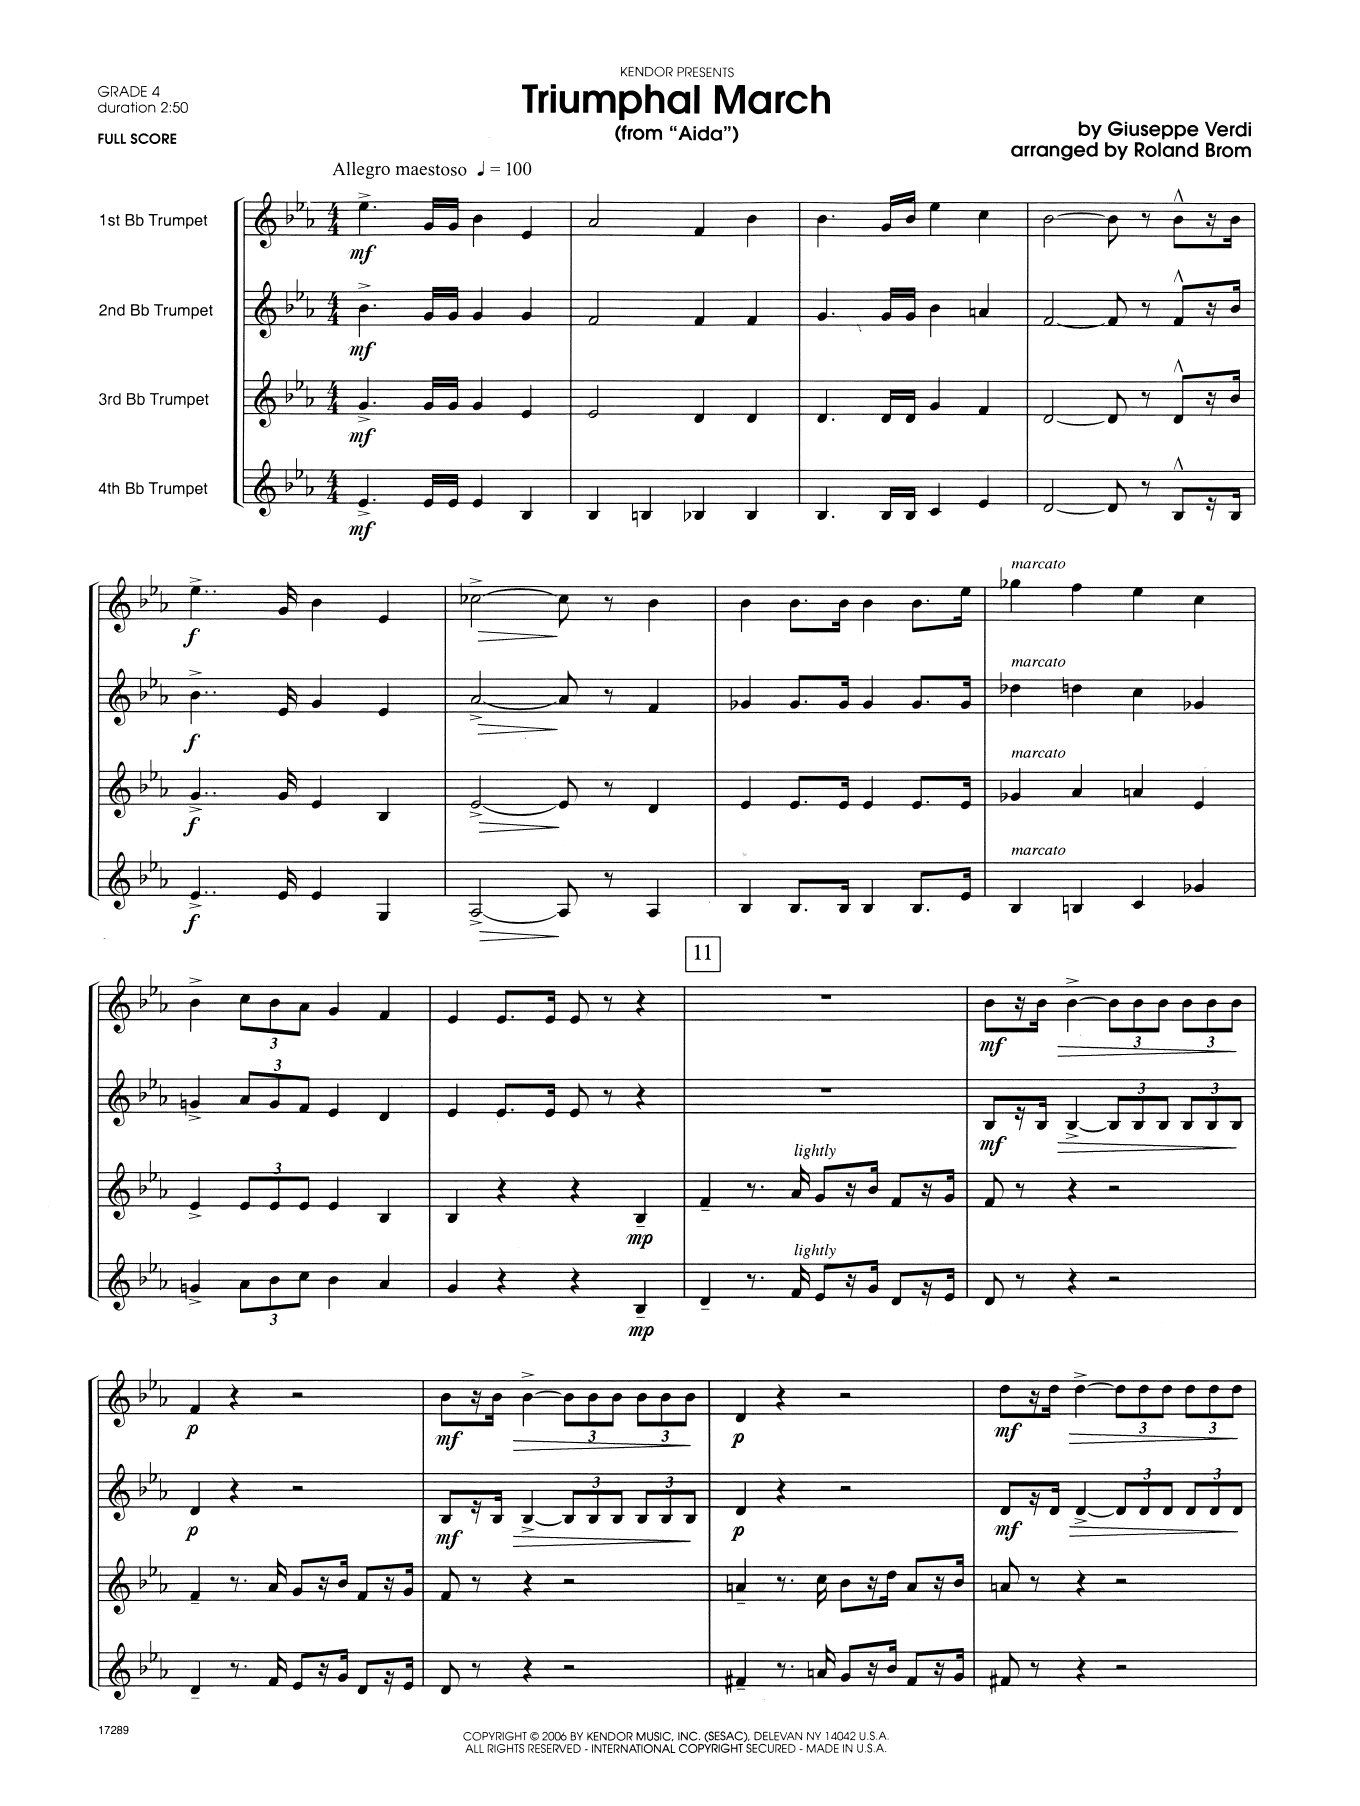 Download Roland Brom Triumphal March (from Aida) - Full Scor Sheet Music